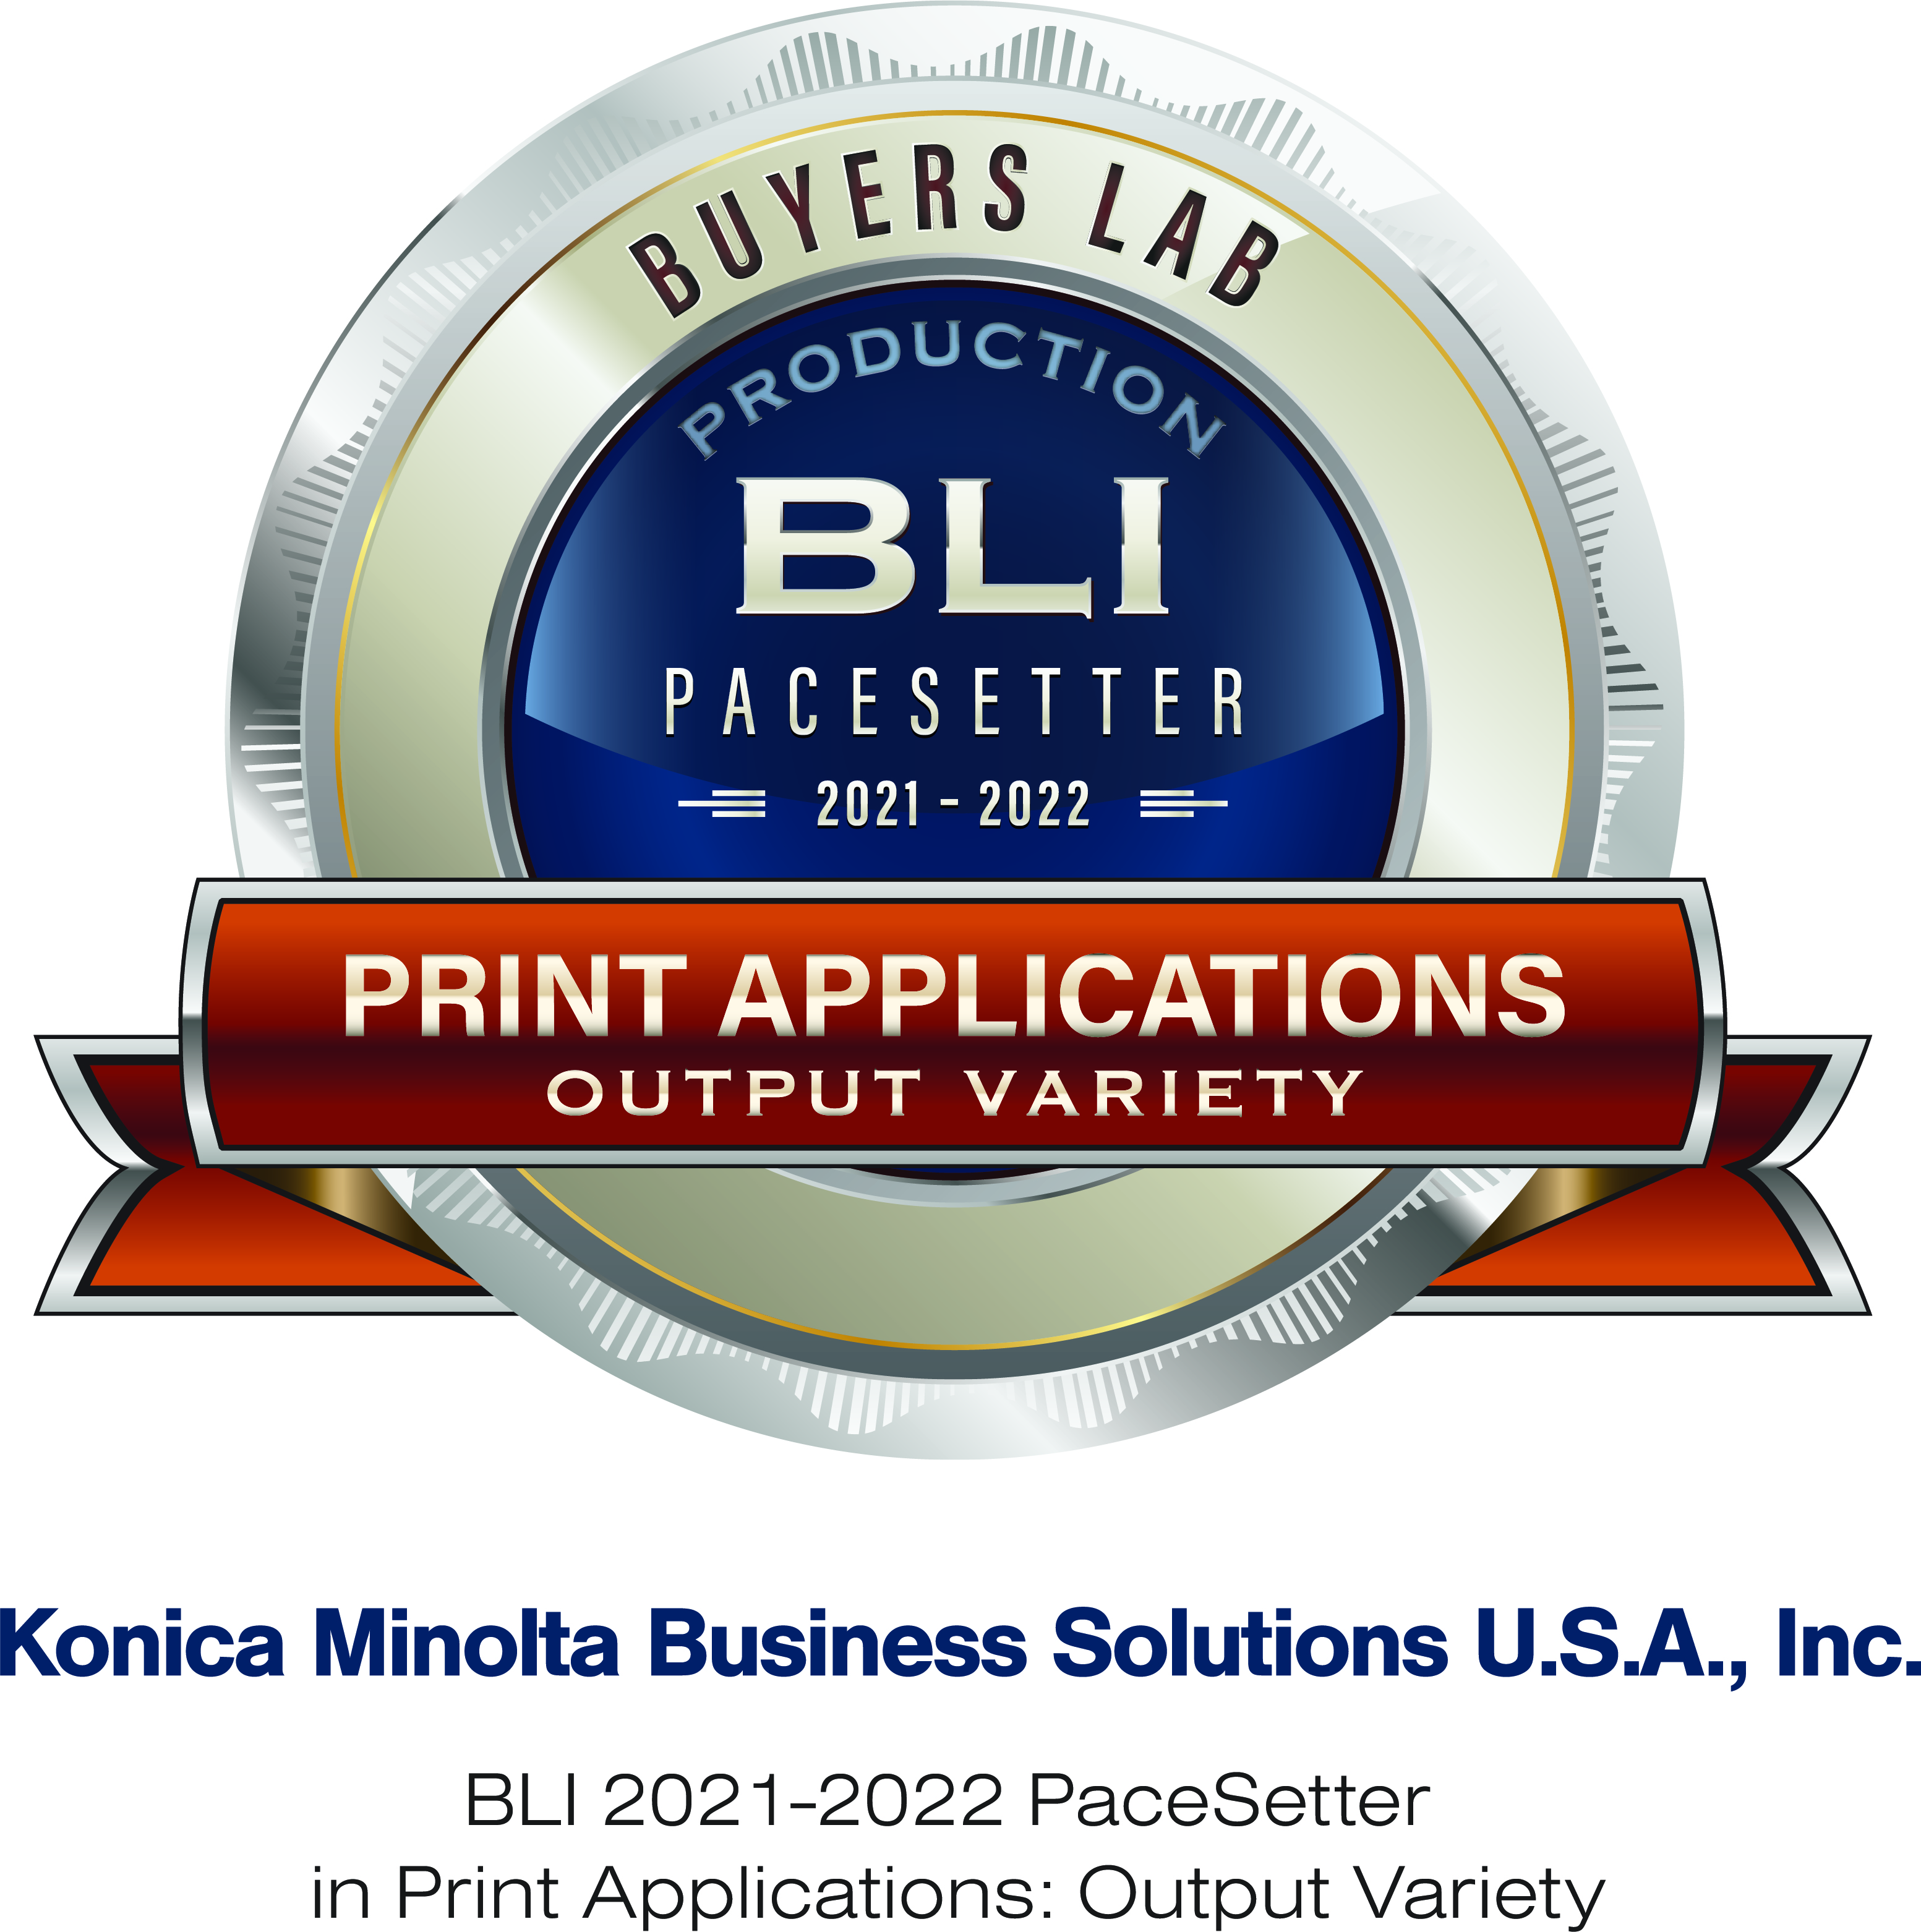 BLI-Award-2021-2022-PaceSetter-in-Print-Applications-Output-Variety-Seal.jpg